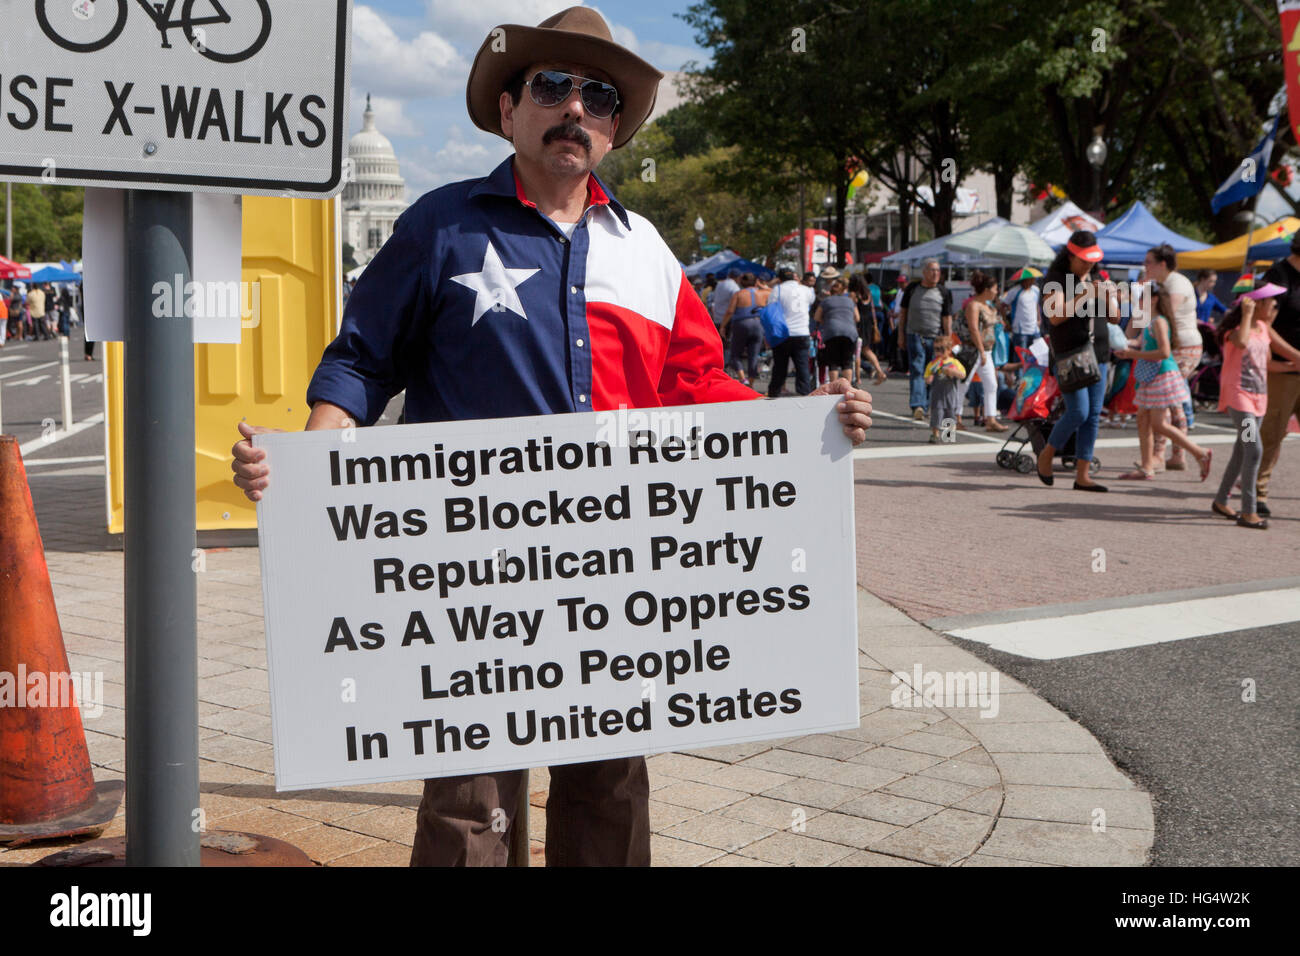 Immigration Reform protester opposing the Republican Party - Washington, DC USA Stock Photo